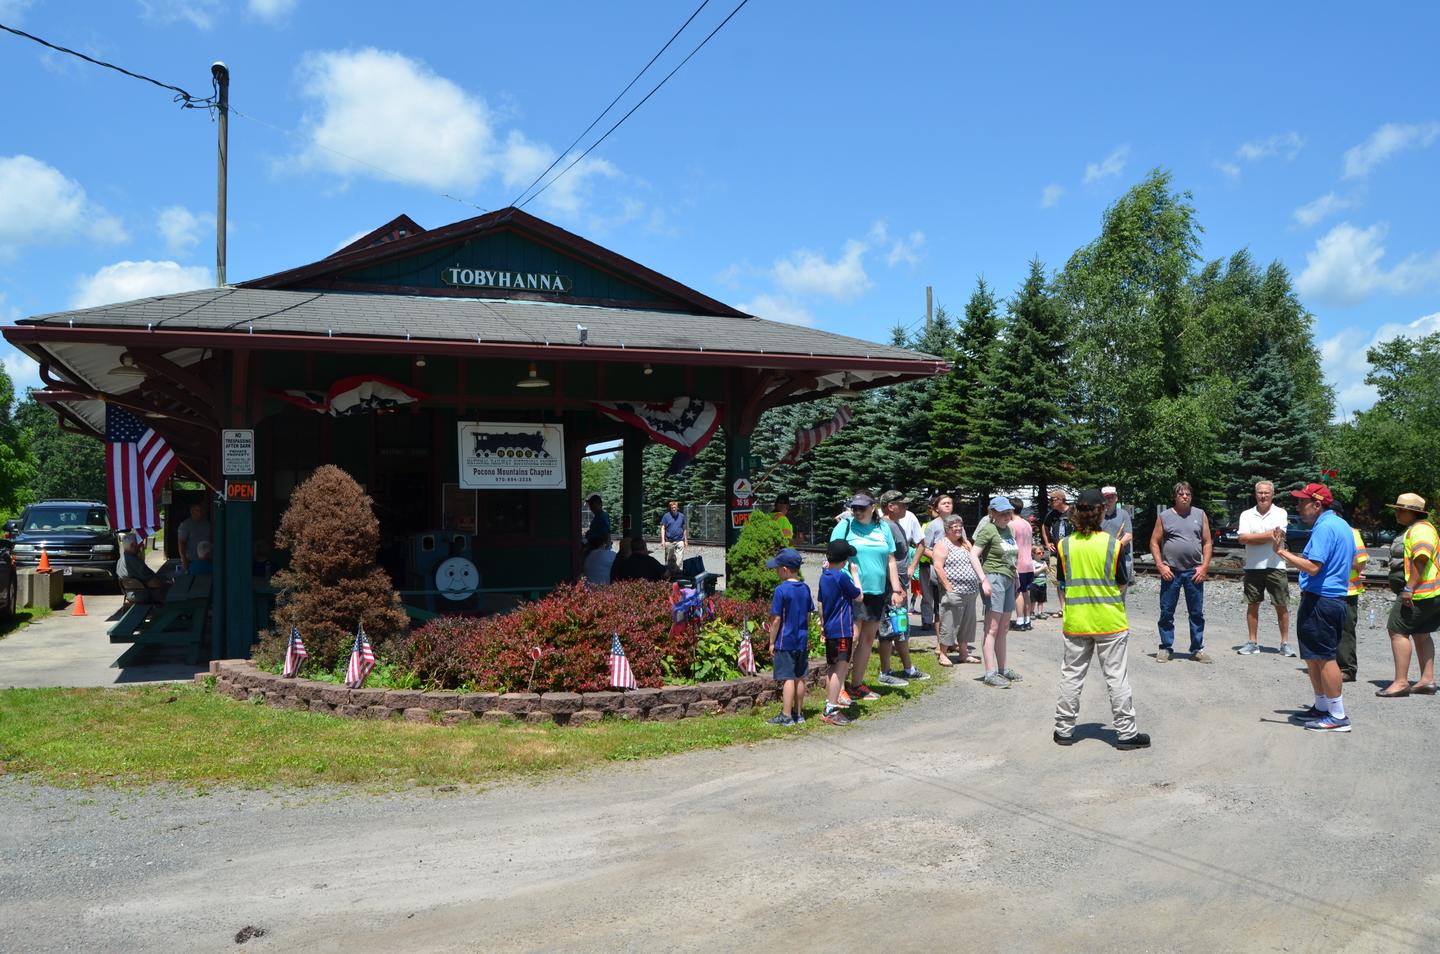 A crowd of approximately 15 people gathered outside at Tobyhanna StationMembers of the Coolbaugh Township Historical Association provide optional walking tours of the Town of Tobyhanna. The tour includes a look at the historic past of Tobyhanna that was originally the hub of the logging industry thanks to the easy access to the Railroad.